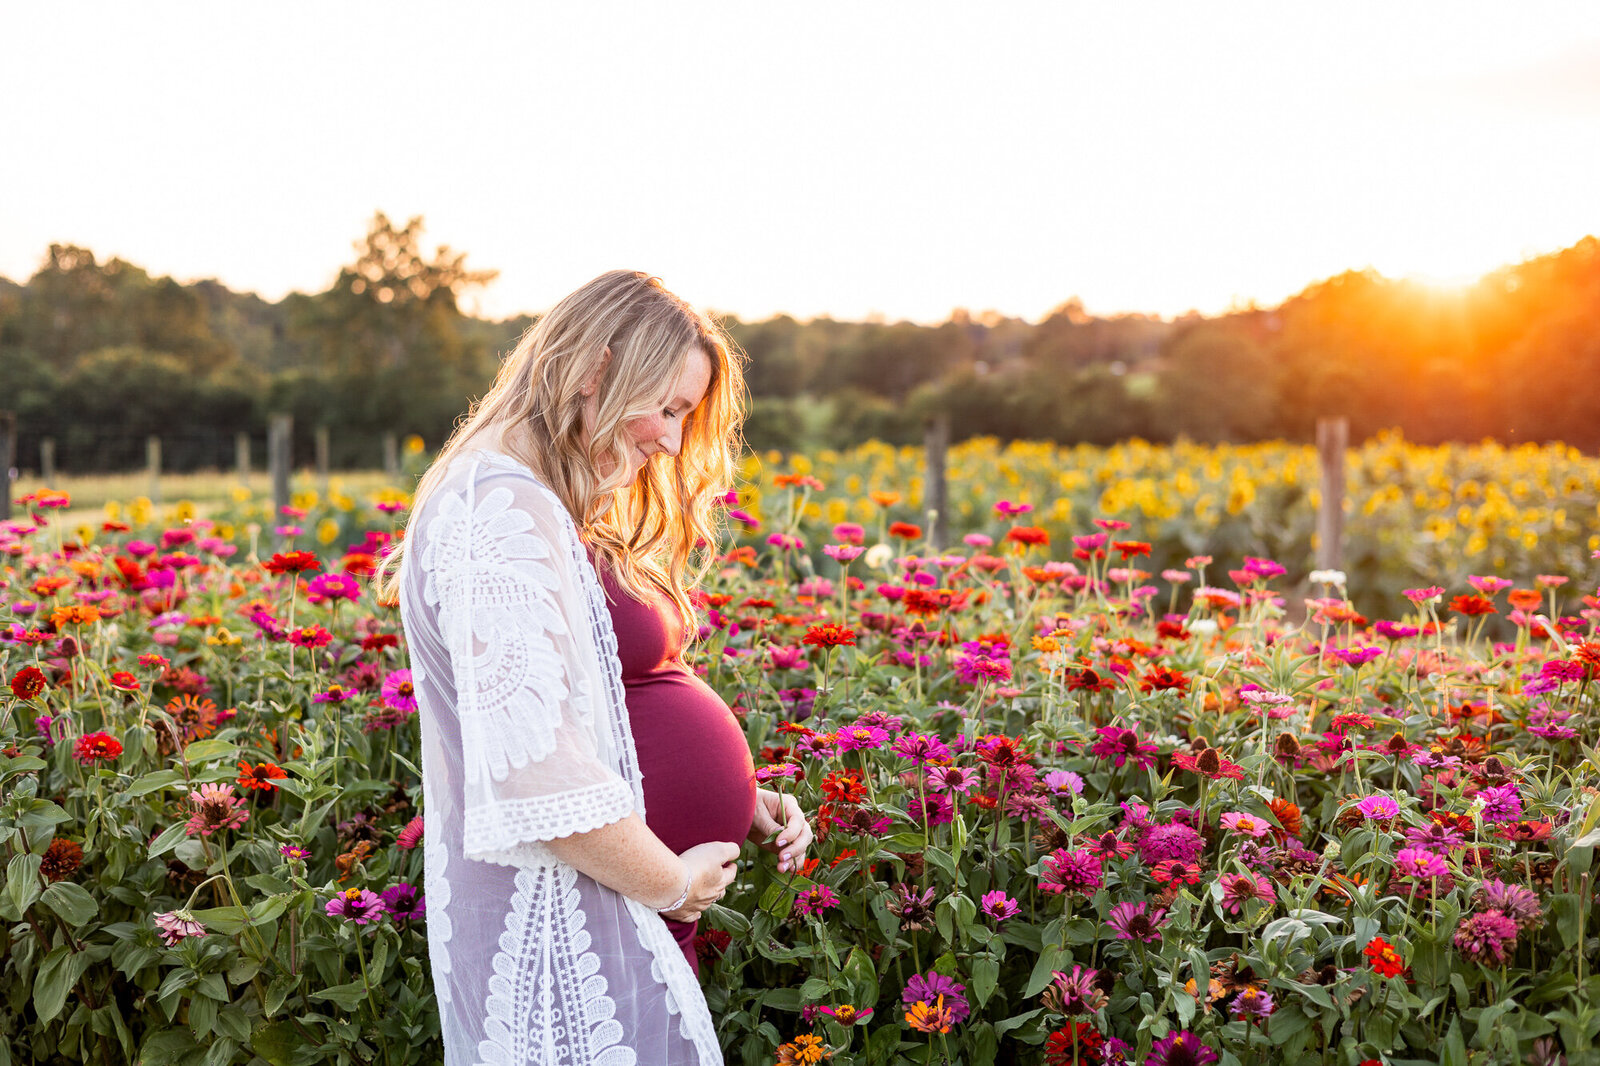 Outdoor-maternity-photography-sunflower-field-Georgetown-KY-photographer-3